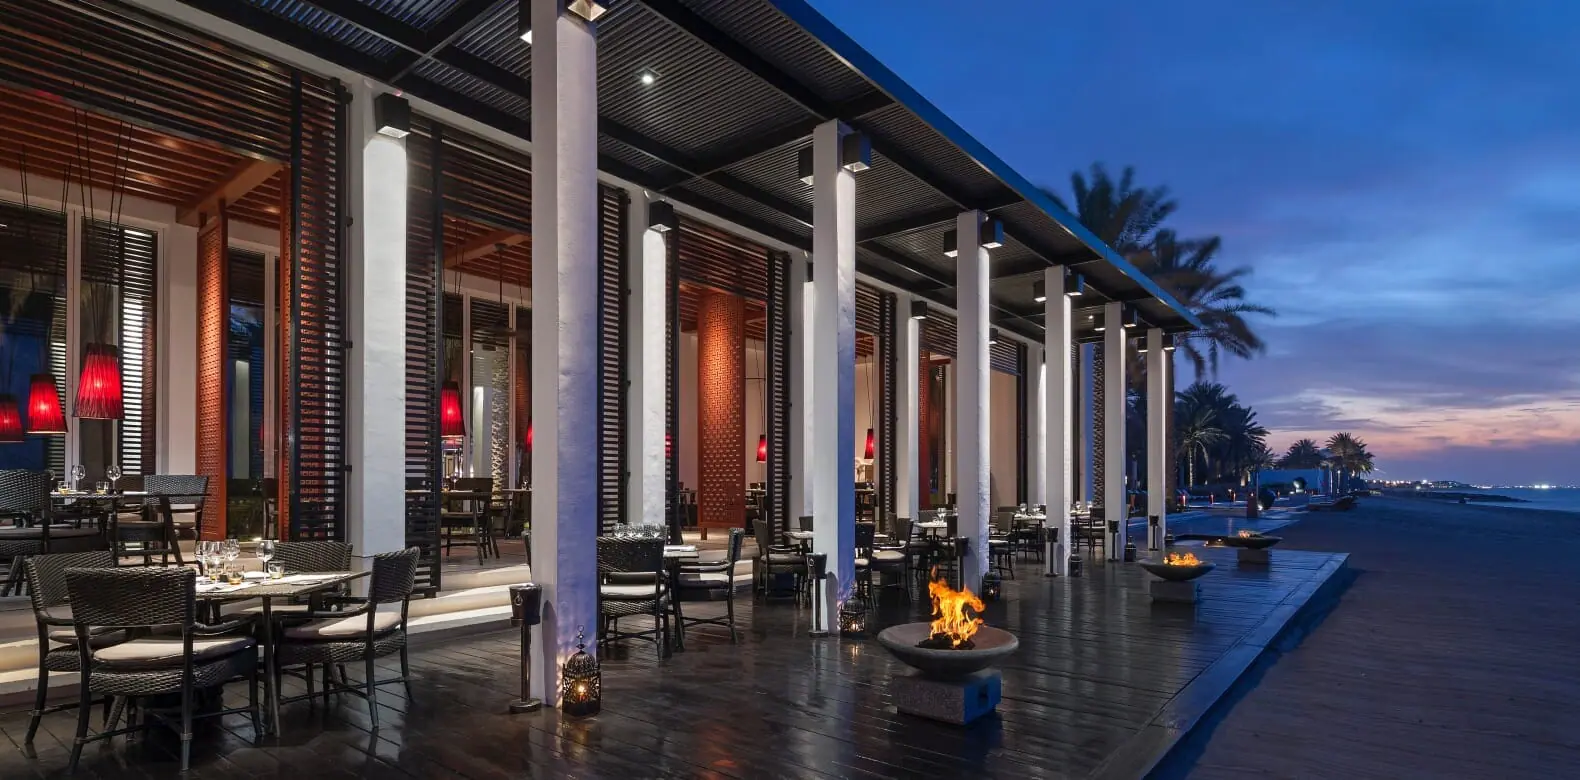 The Beach Restaurant | Dining by the sea in Oman | The Chedi Muscat